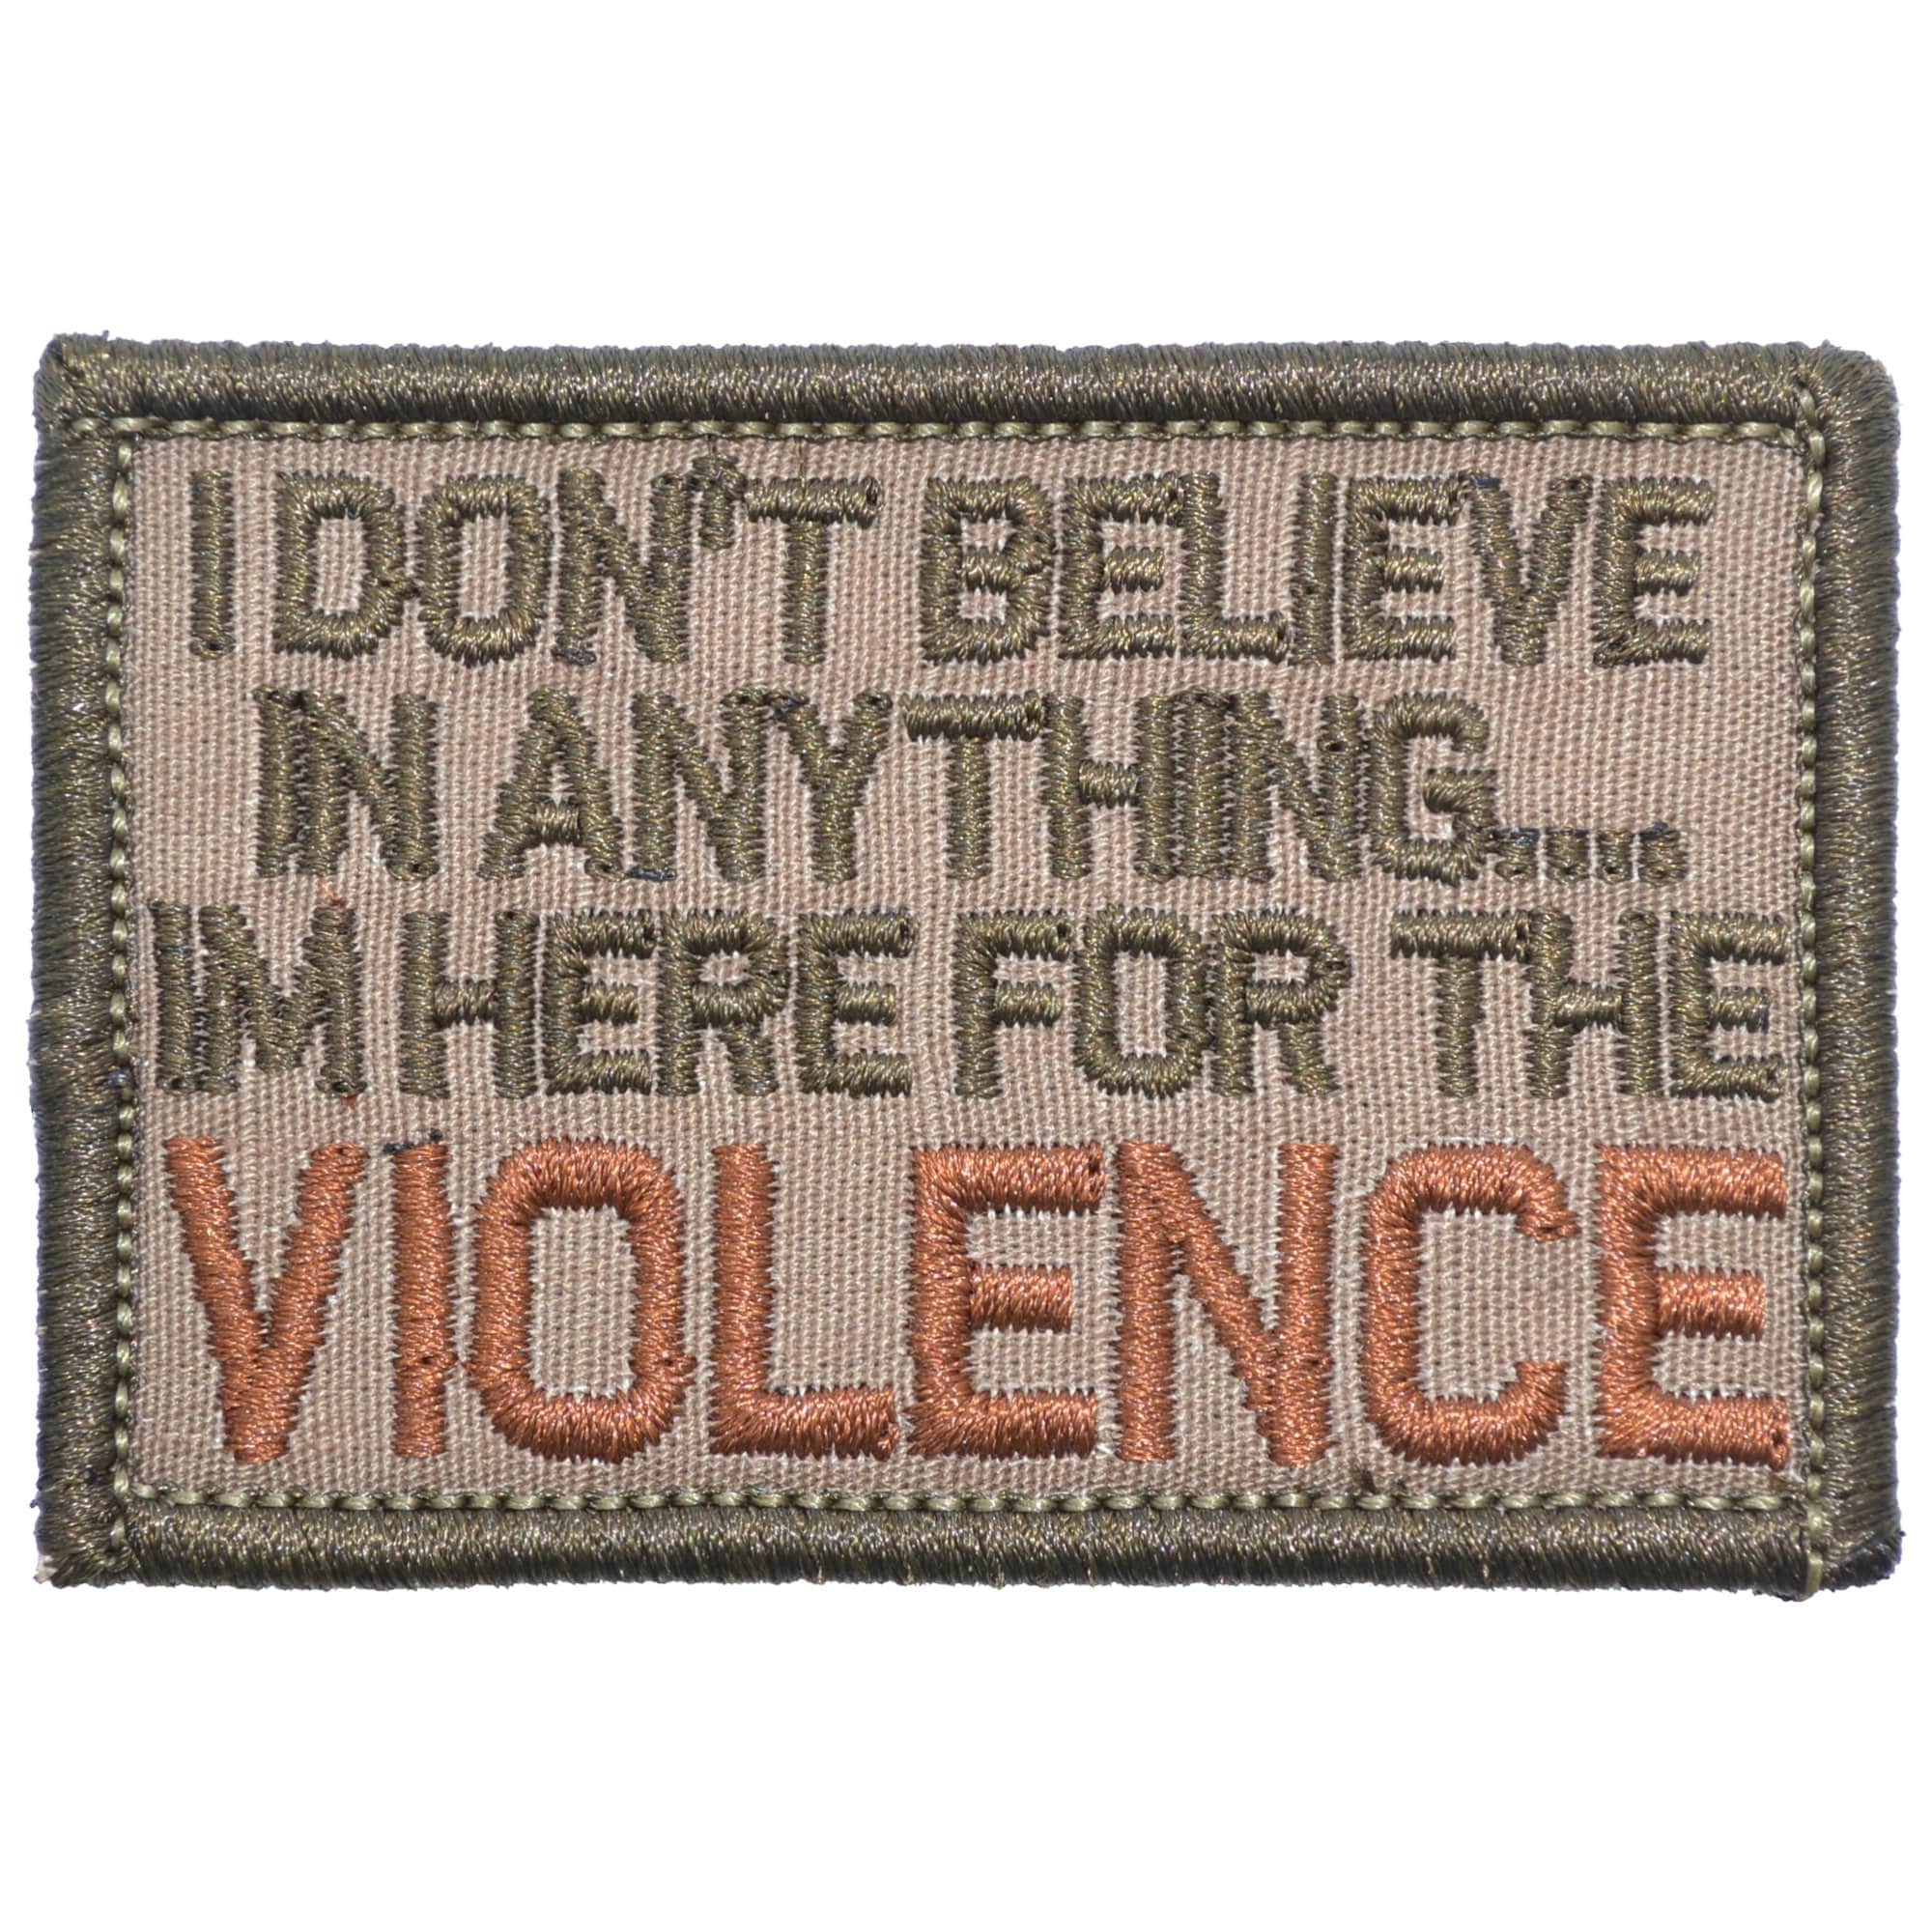 Tactical Gear Junkie Patches Coyote Brown I Don't Believe In Anything... I'm Here for the Violence - 2x3 Patch